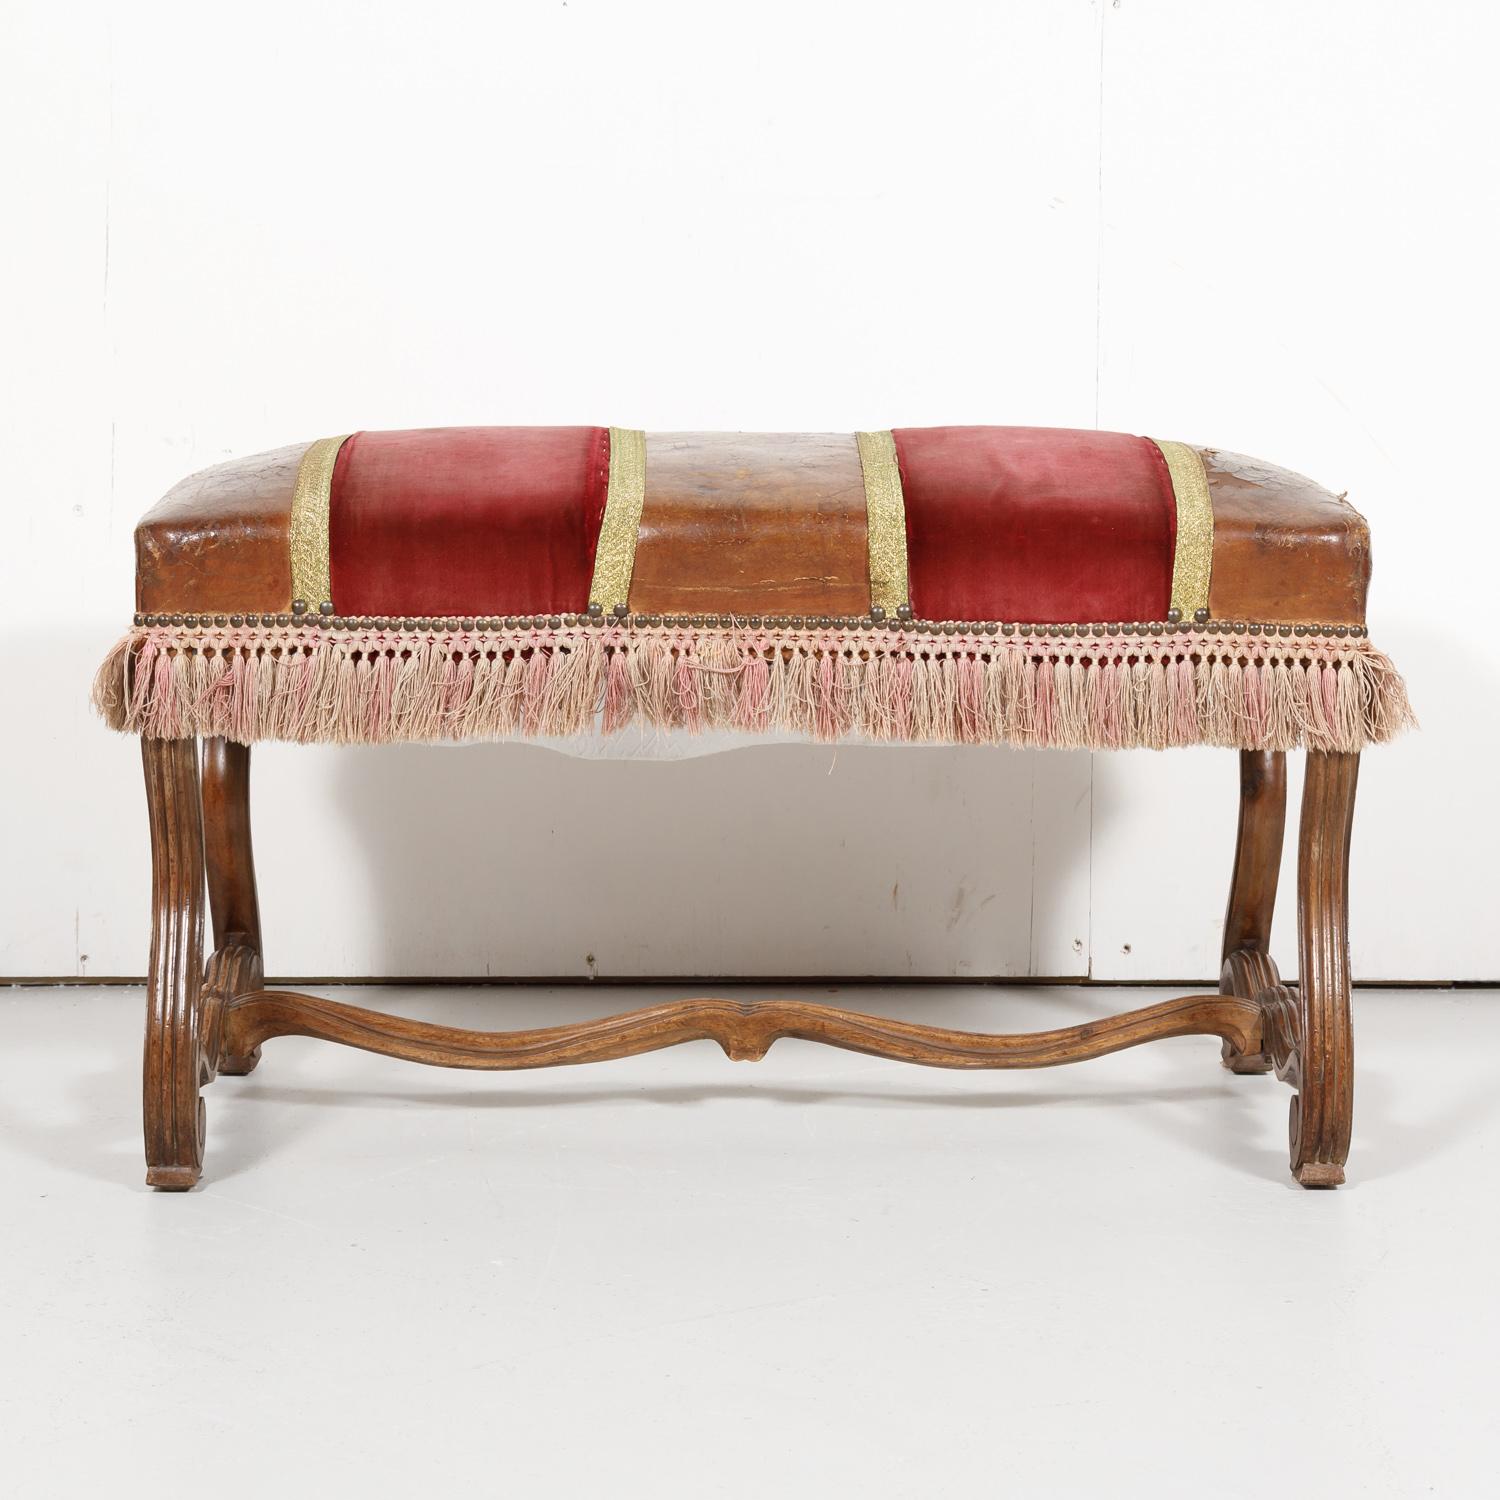 19th Century Spanish Backless Leather and Velvet Louis XIV Style Bench For Sale 2